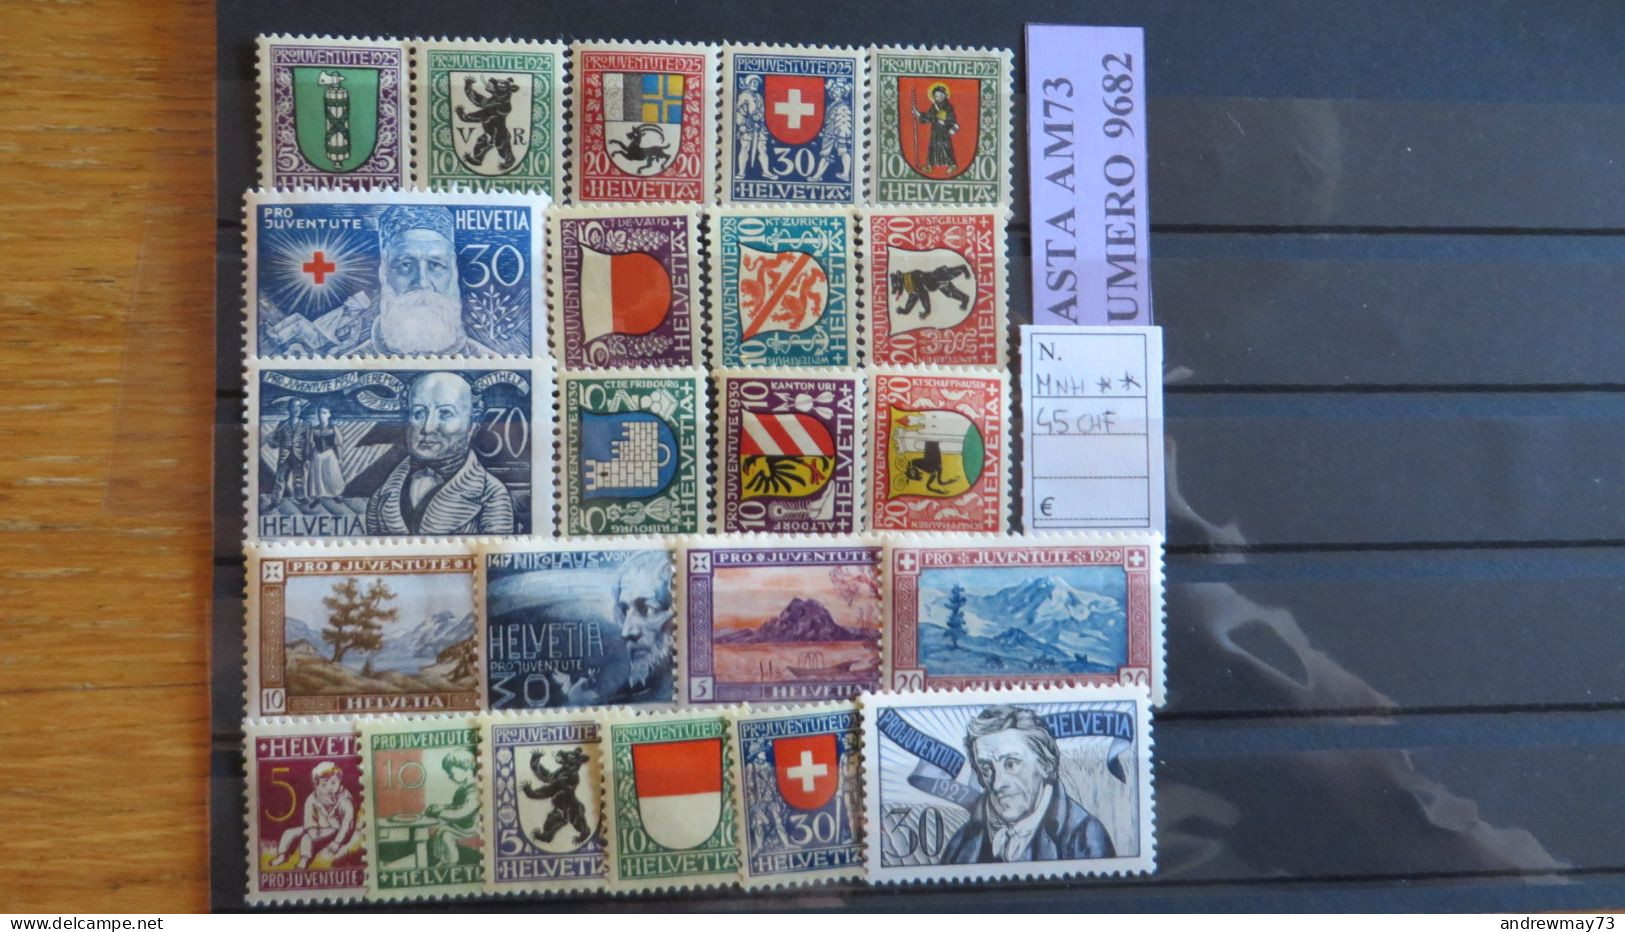 SWITZERLAND- NICE MNH SELECTION - Lotes/Colecciones